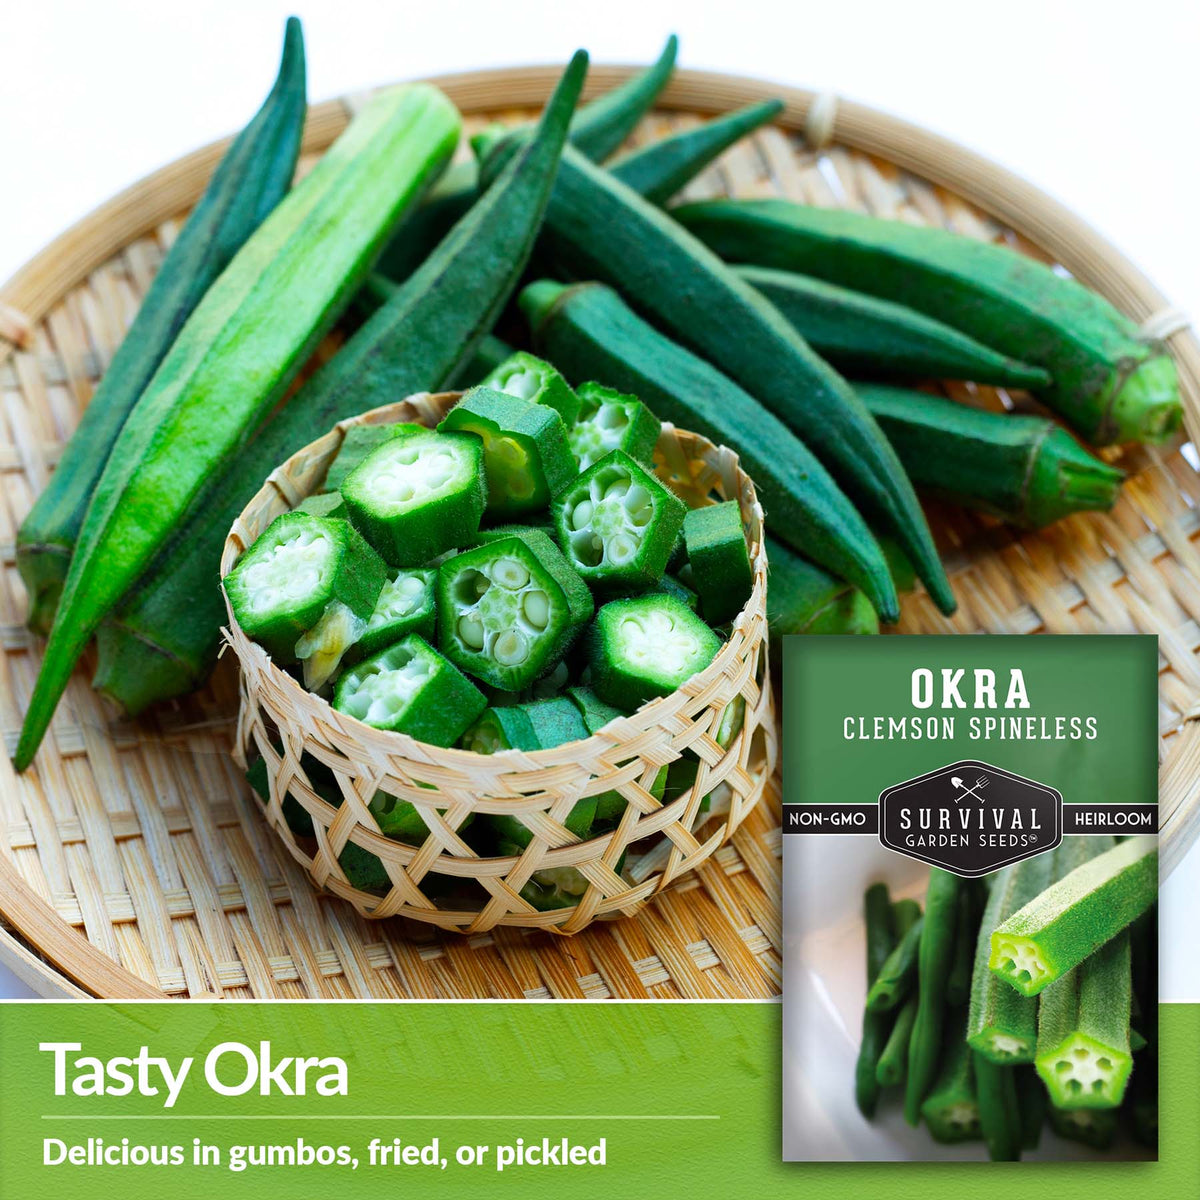 Clemson Spineless Okra is delicious in gumbos, fried or pickled